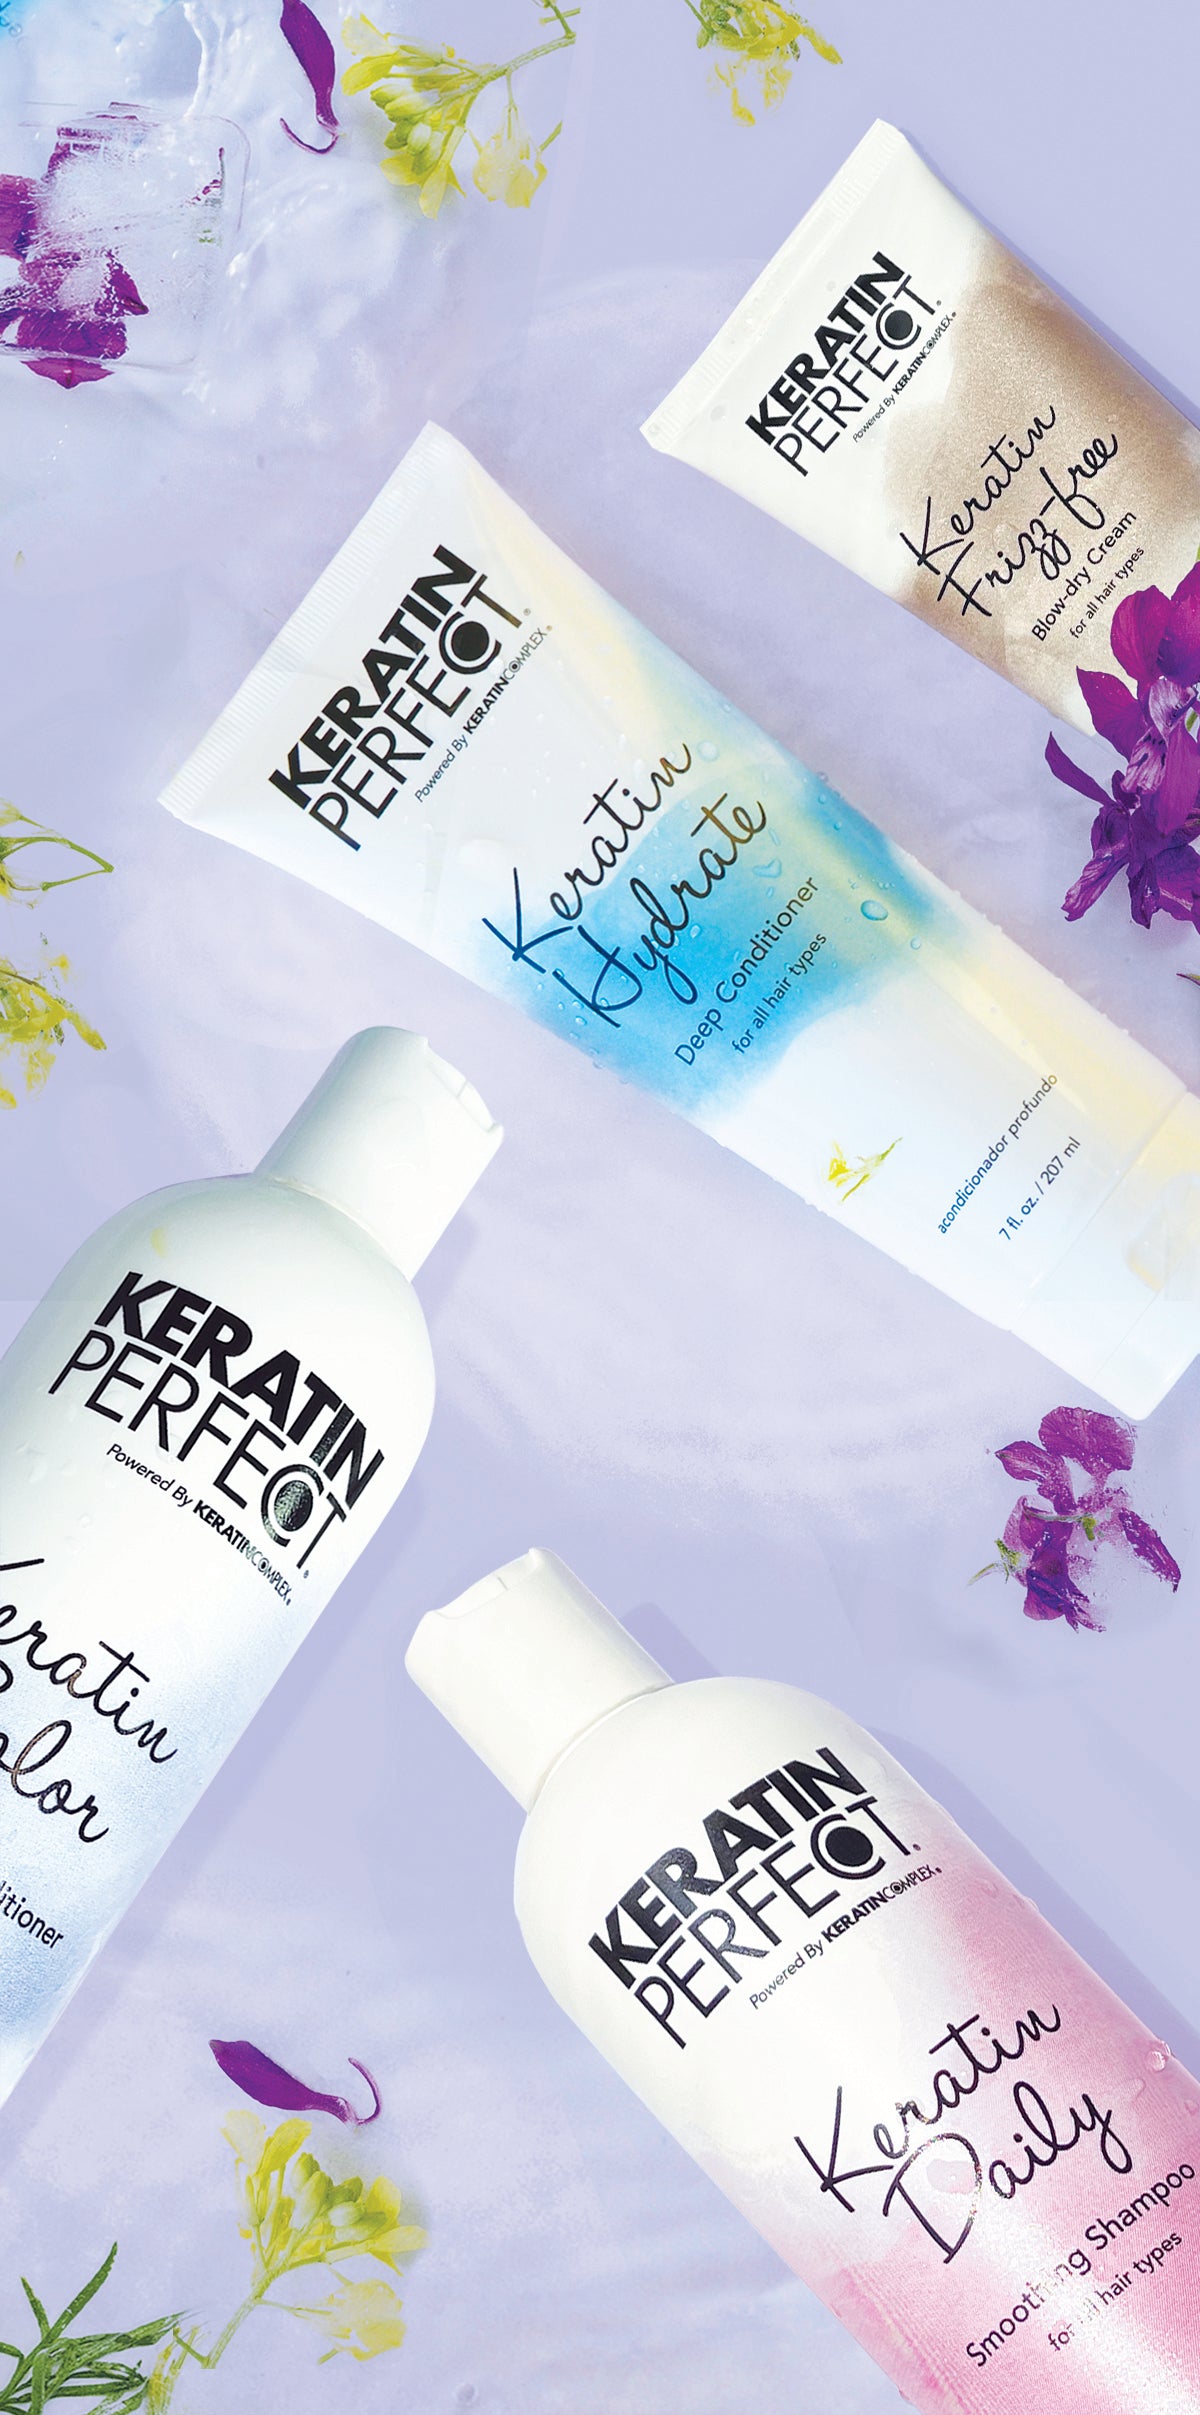 The Keratin Perfect Collection